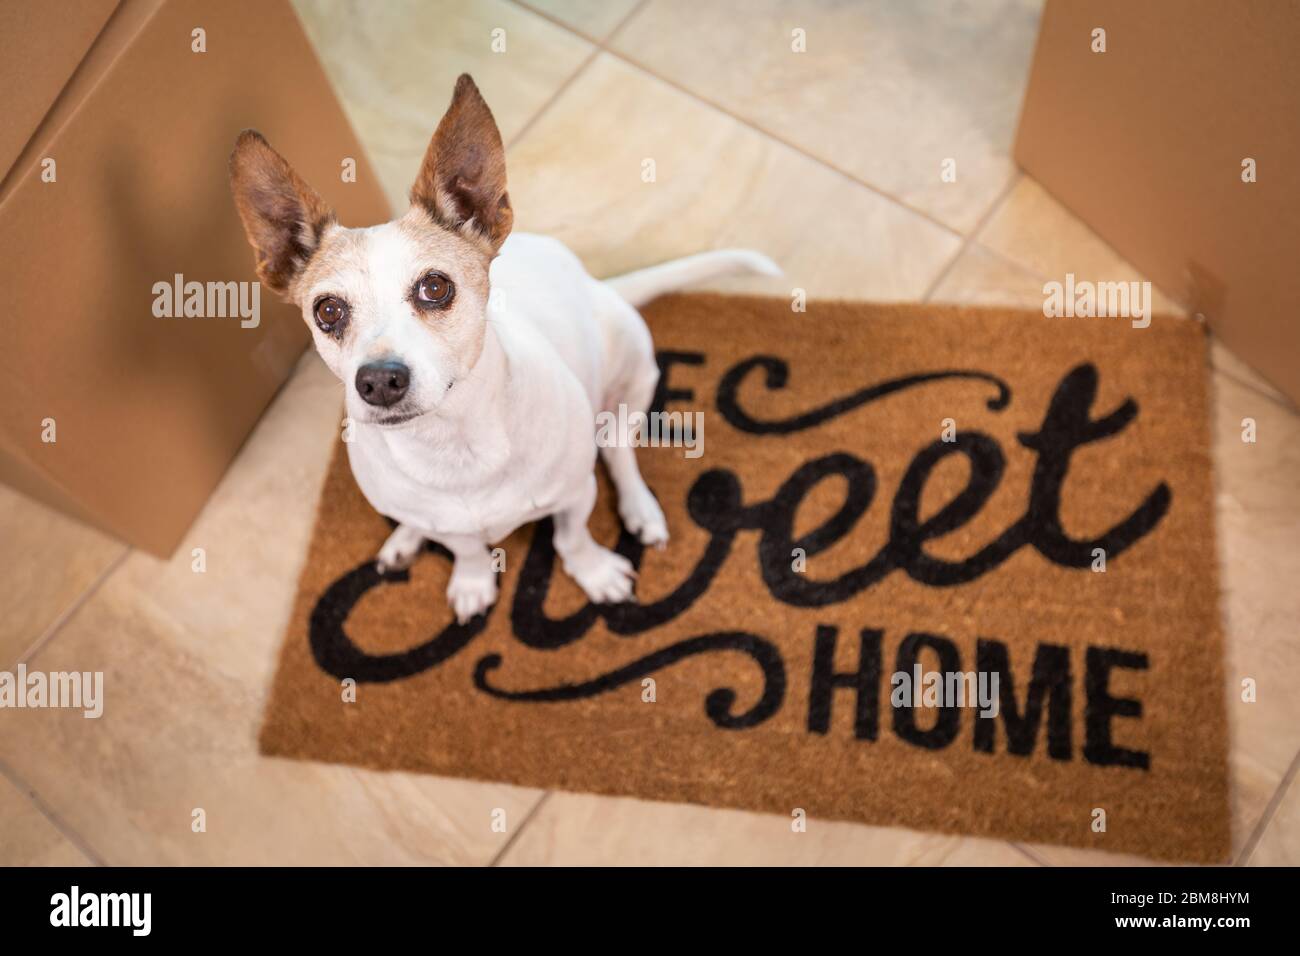 Cute Dog Sitting on Home Sweet Home Welcome Mat on Floor Near Boxes. Stock Photo